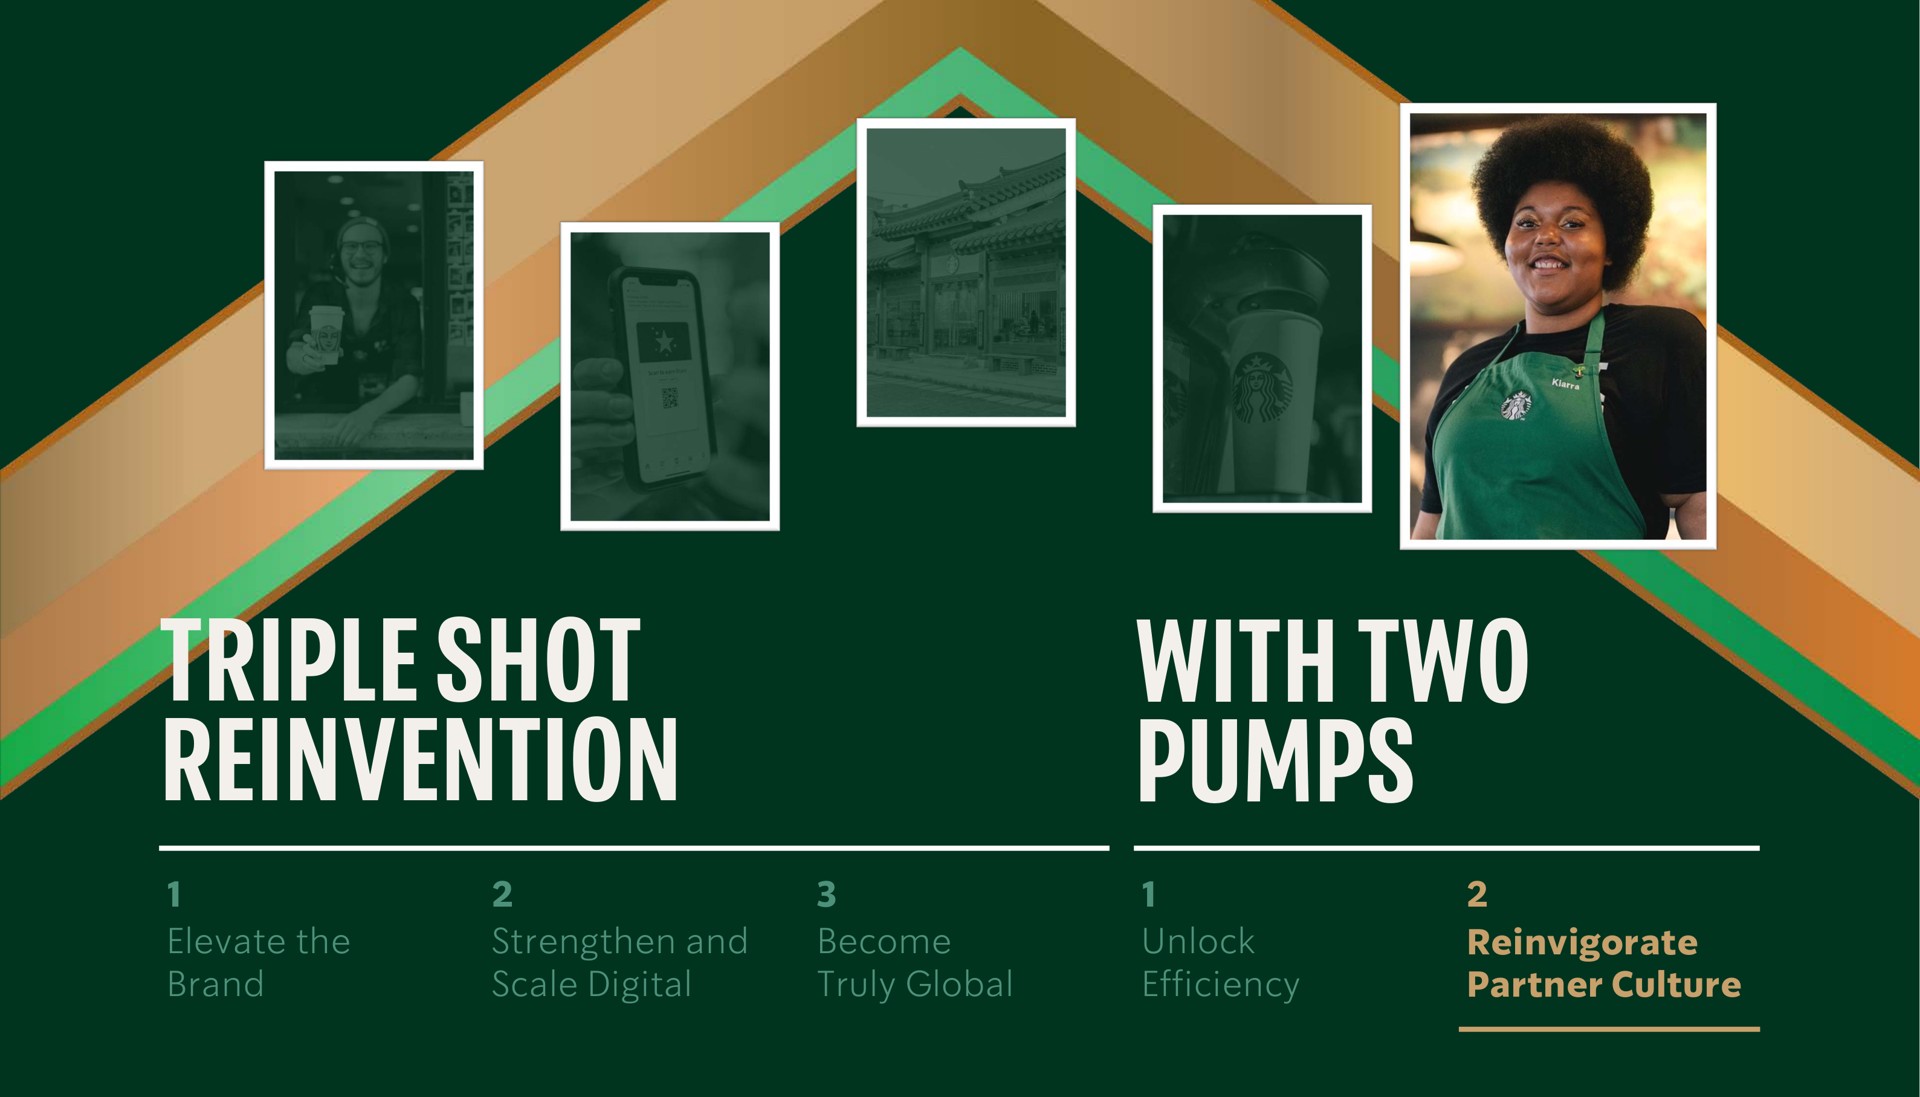 triple shot reinvention with two pumps us | Starbucks